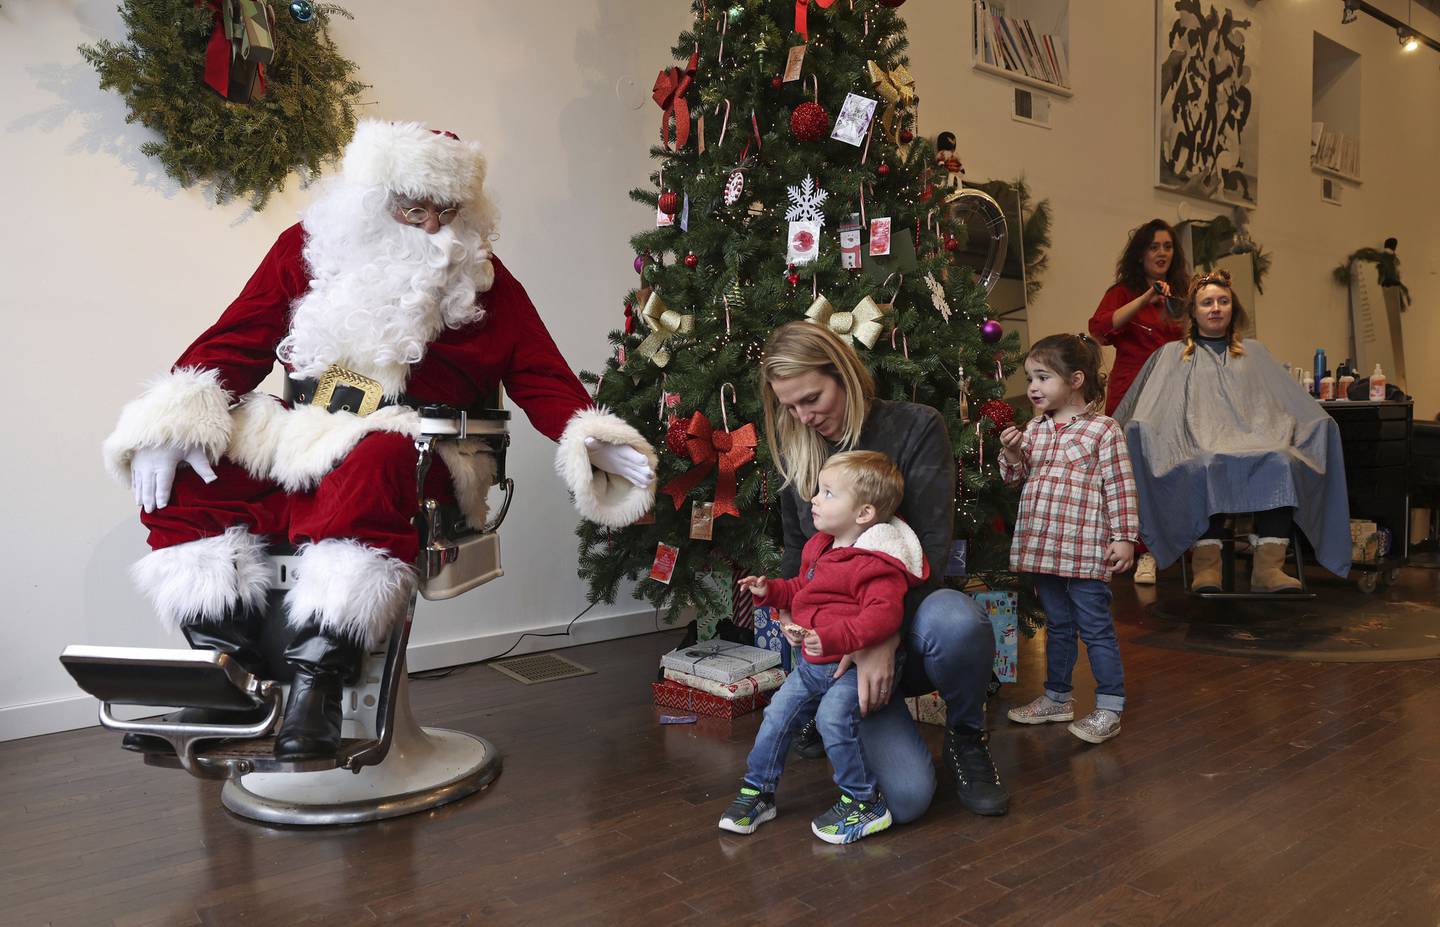 Ronnie Trejo, portraying Santa Claus, sits in a barber's chair as Kristie Stewart encourages her son, Graeme, 1, to take pictures with him at YO:U hair salon on Dec. 10, 2022, in Chicago. Trejo said he has played Santa for more than 20 years, in more recent years at the salon, which is owned by his daughter, Yolanda Trejo, second from right. 